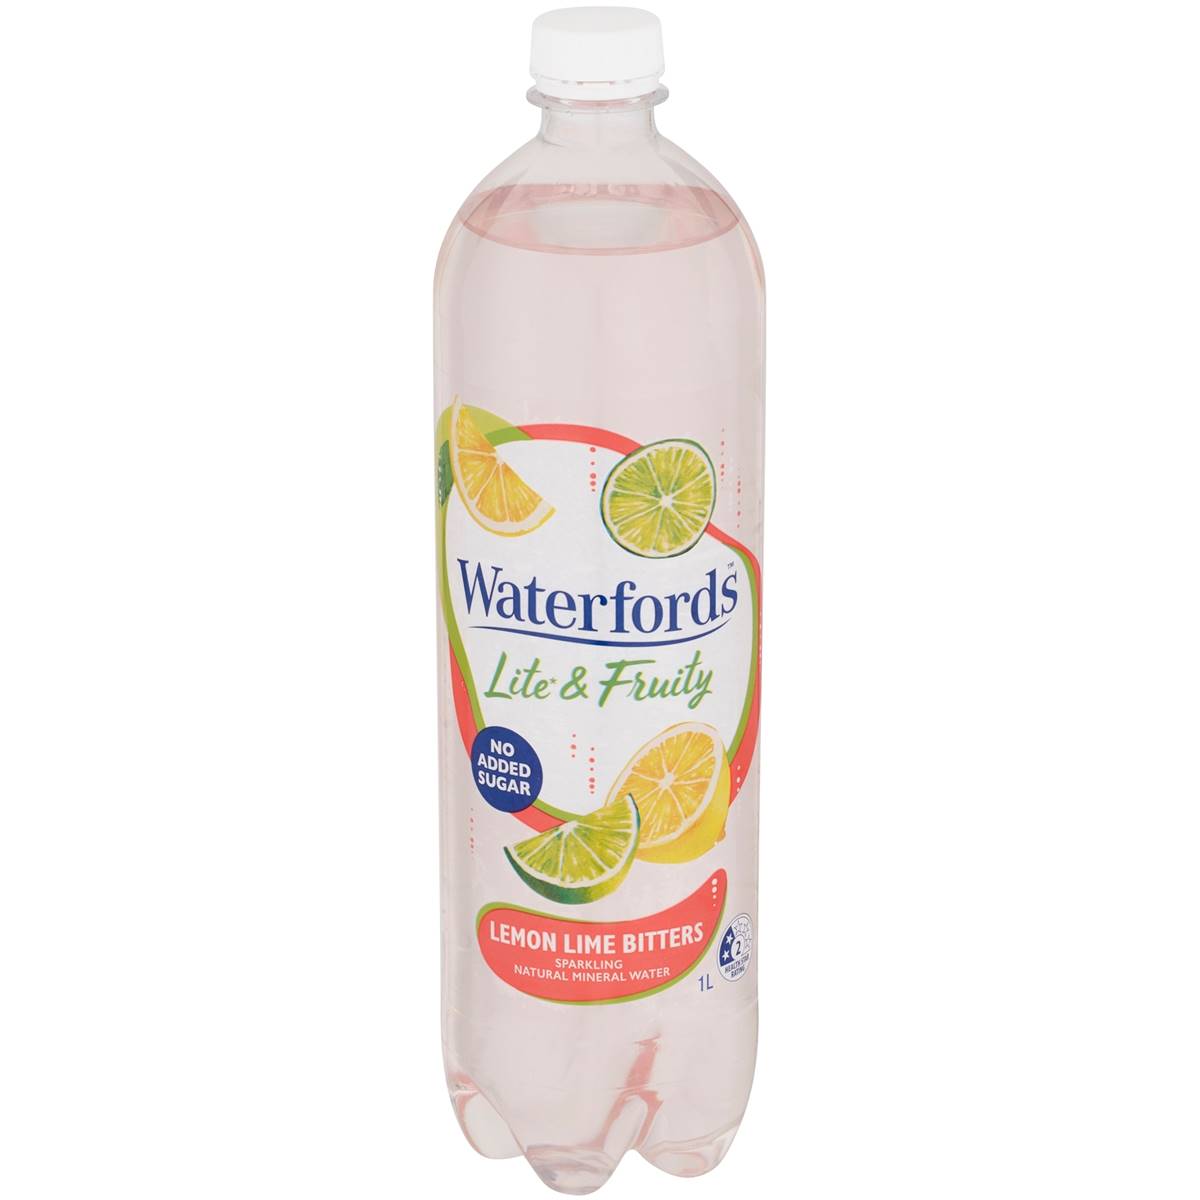 Waterfords Sparkling Mineral Water Lemon Lime Bitters 1L